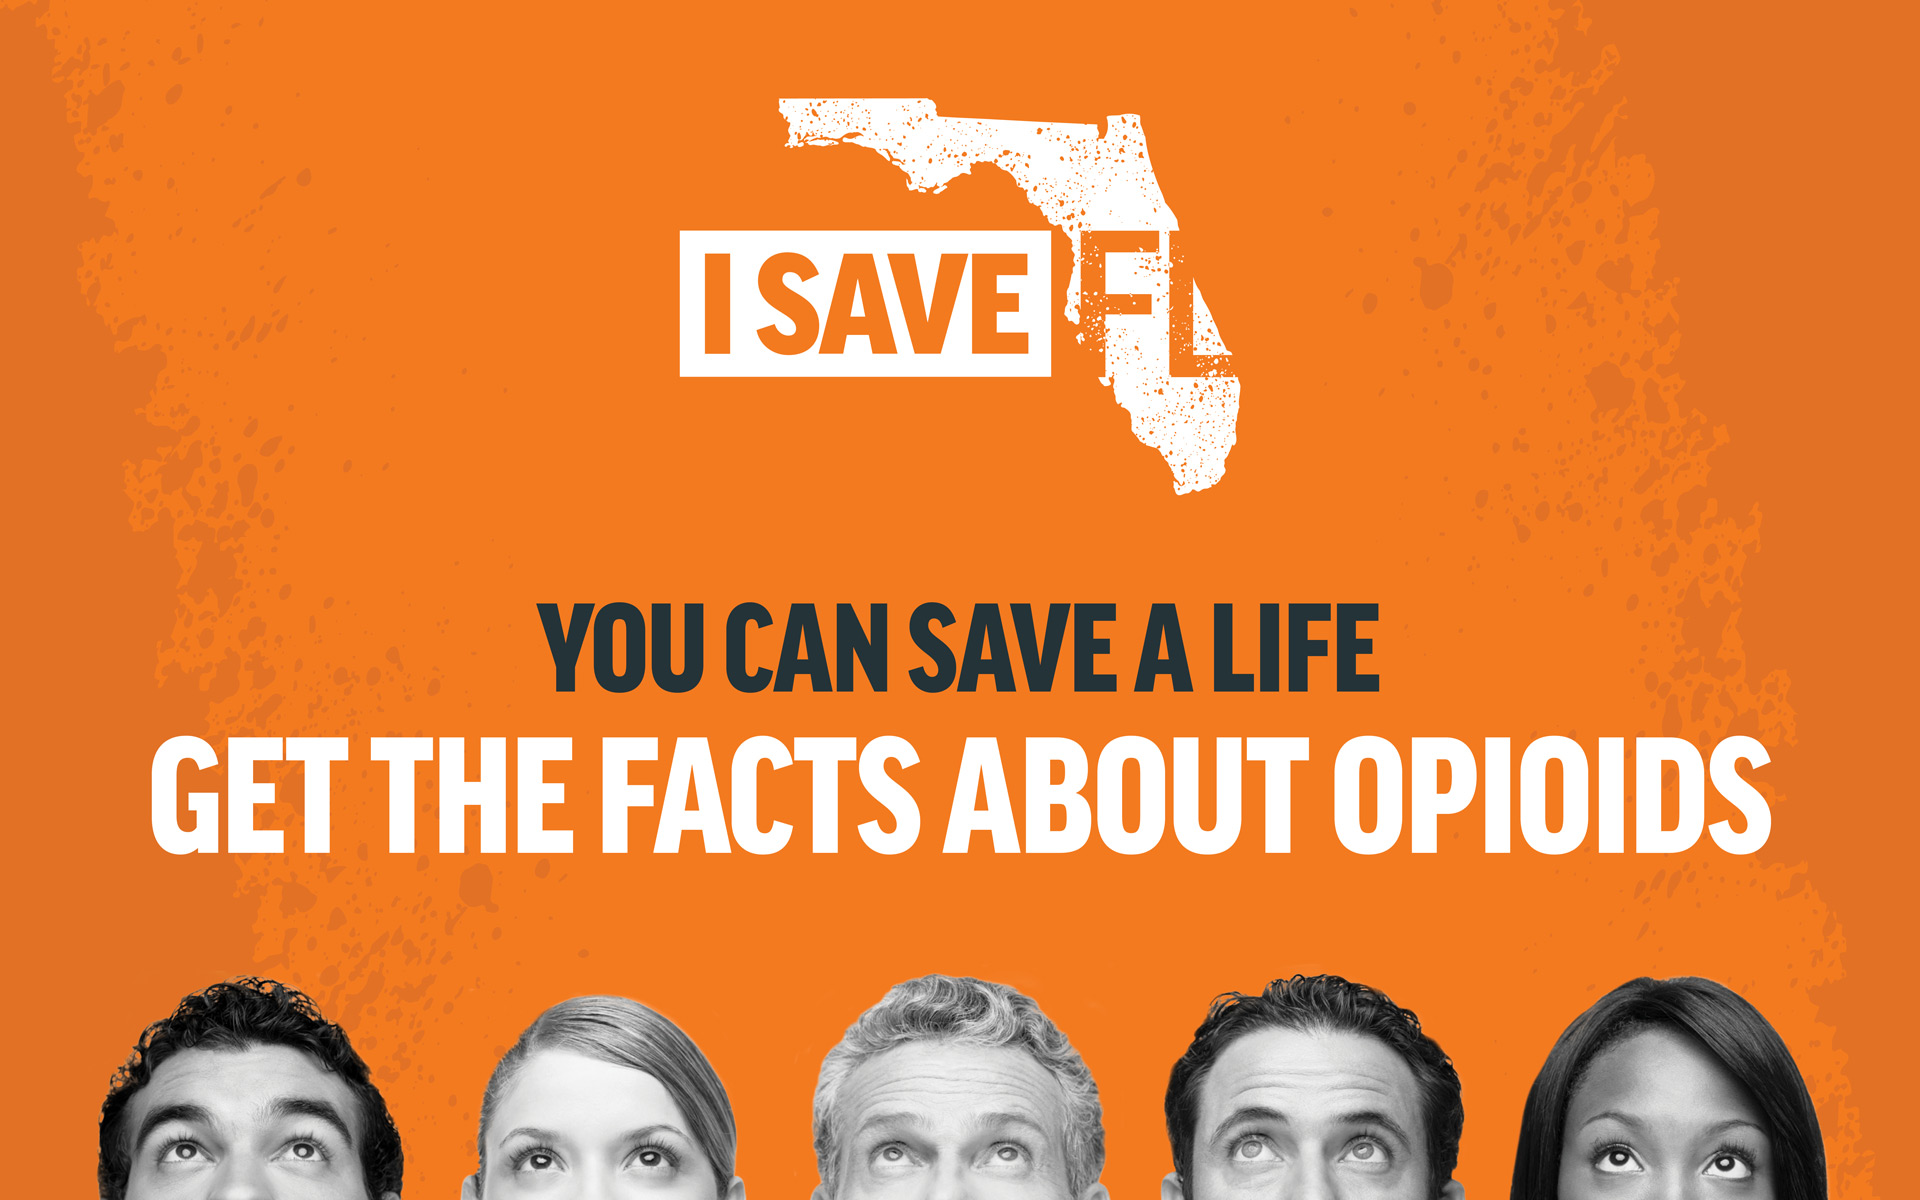 I Save FL Get the Facts About Opioids